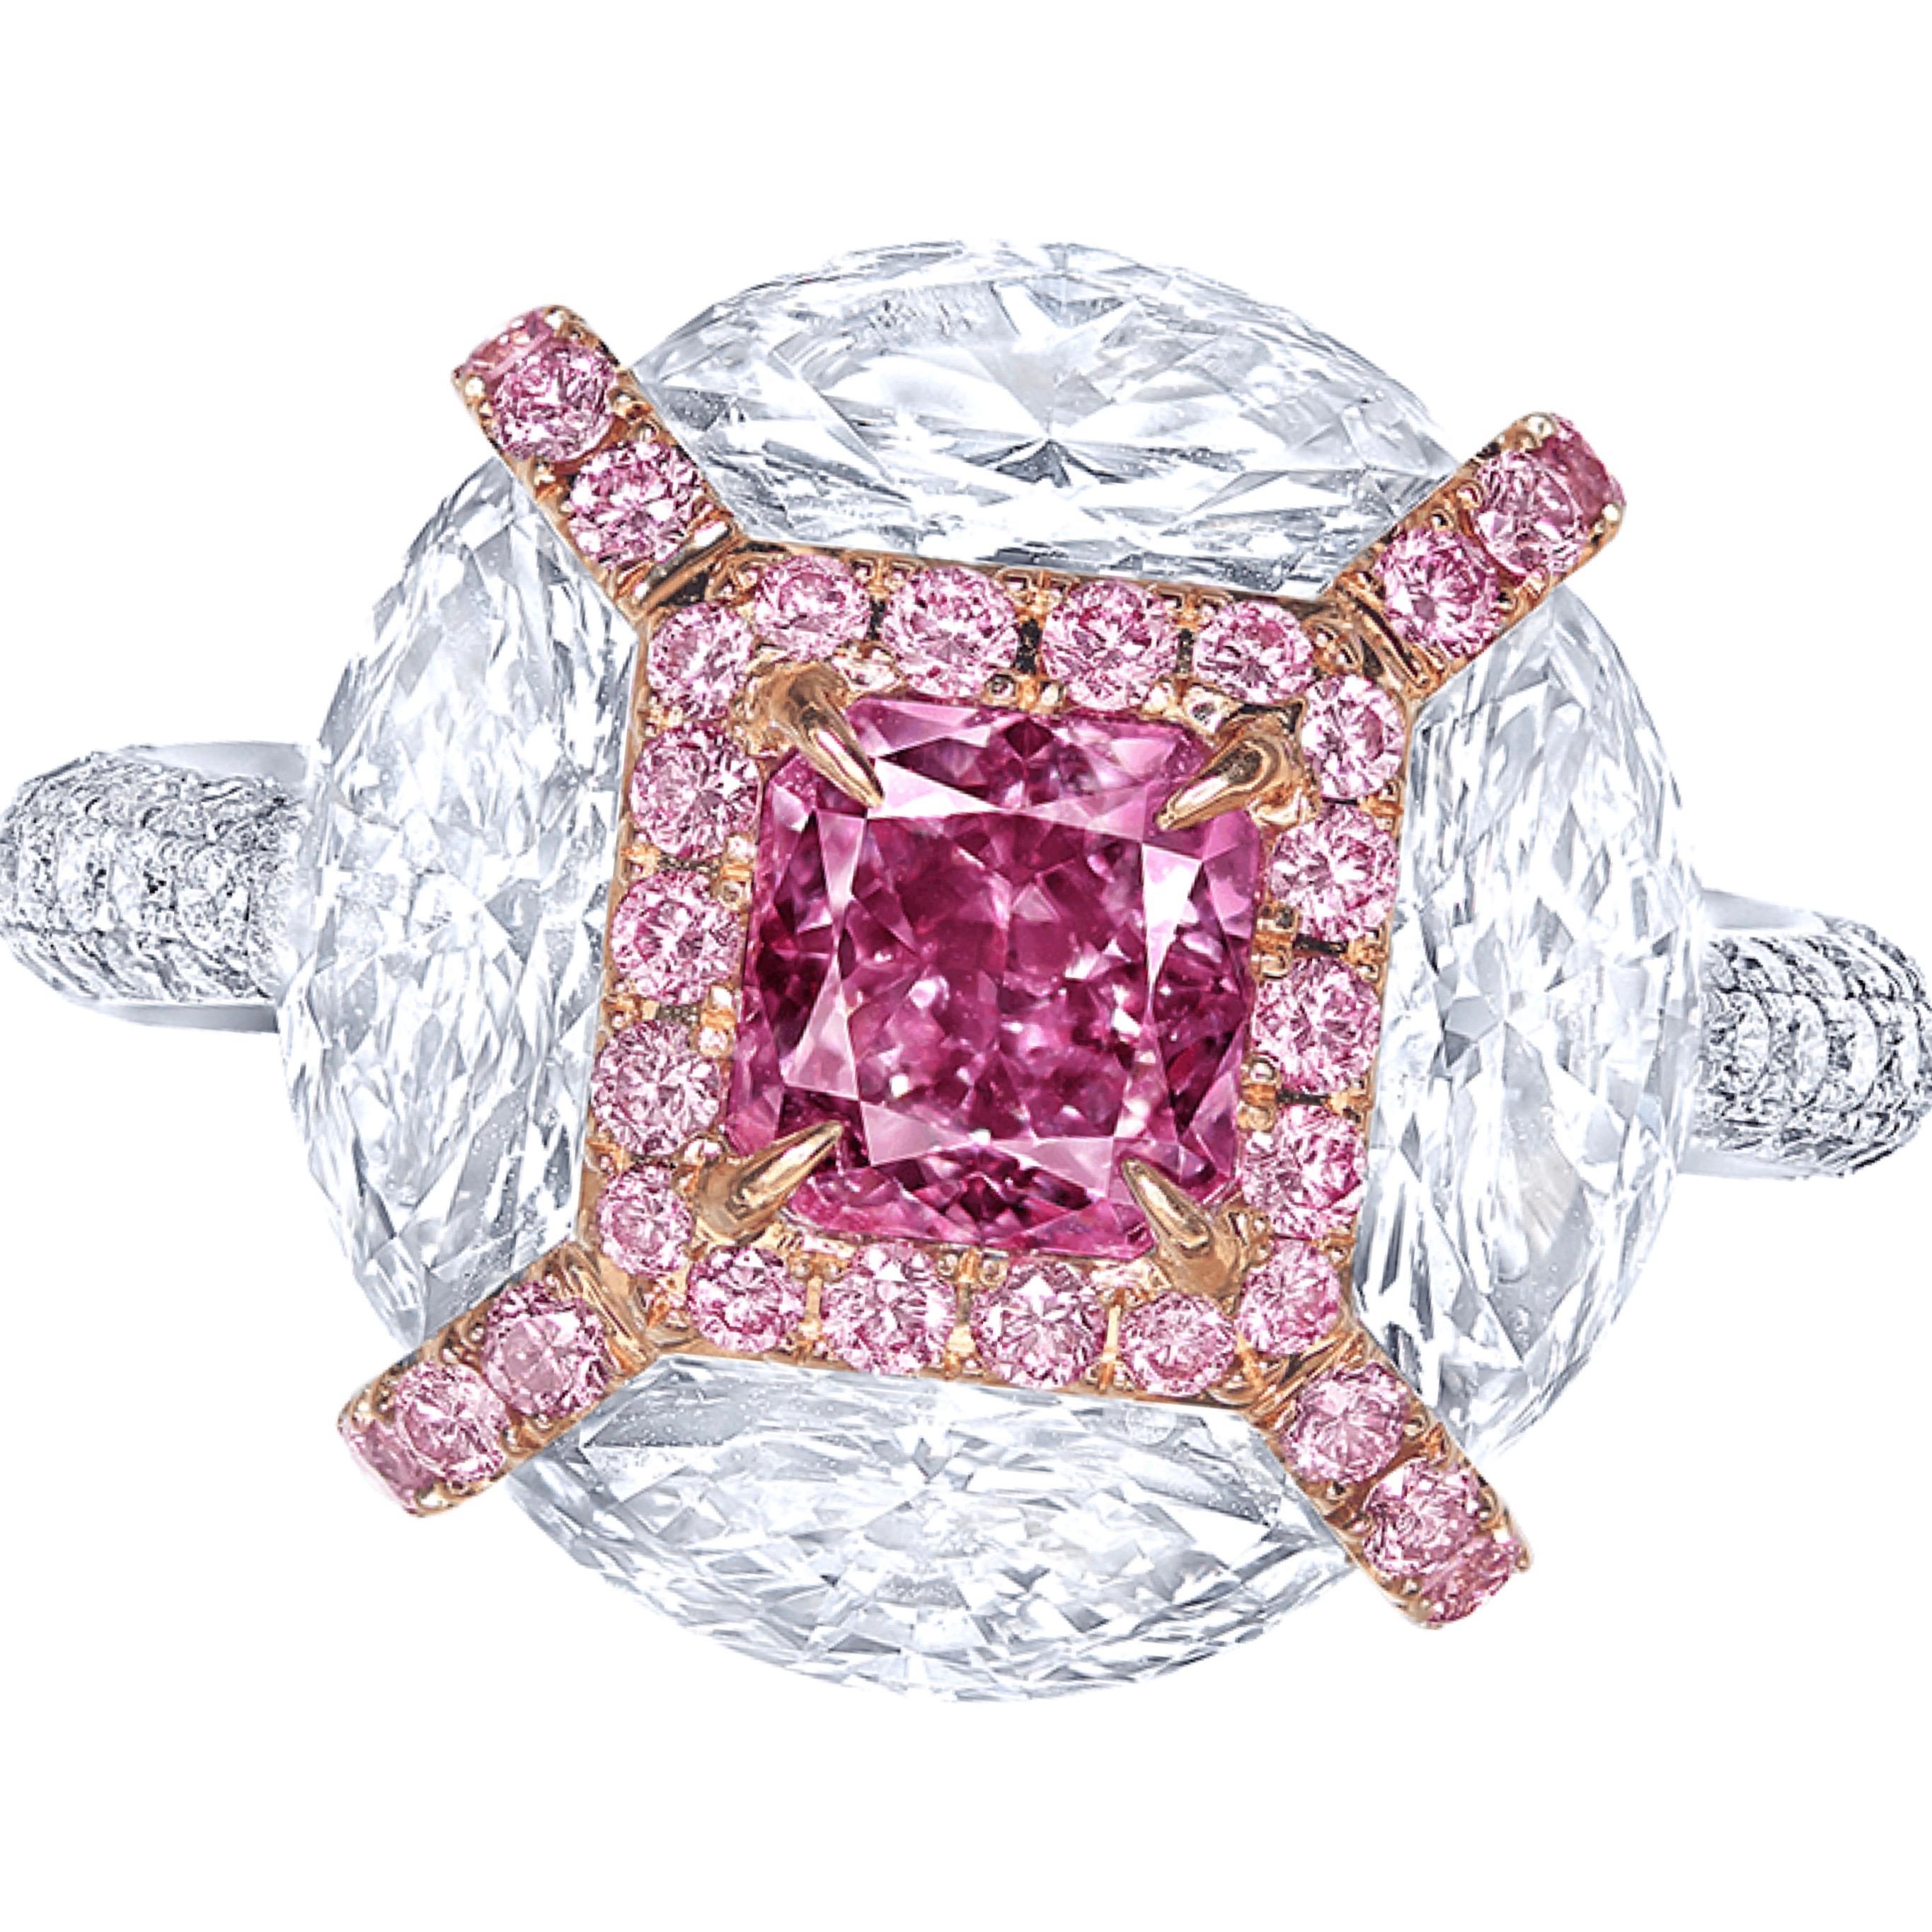 From the museum vault at Emilio Jewelry in New York. 
Main stone: Gia certified 1.00 carat natural Fancy Intense Pink-Purple 
Setting: 4 fancy-cut white diamonds totaling approximately 2.40 carats, 34 pink diamonds totaling approximately 0.28